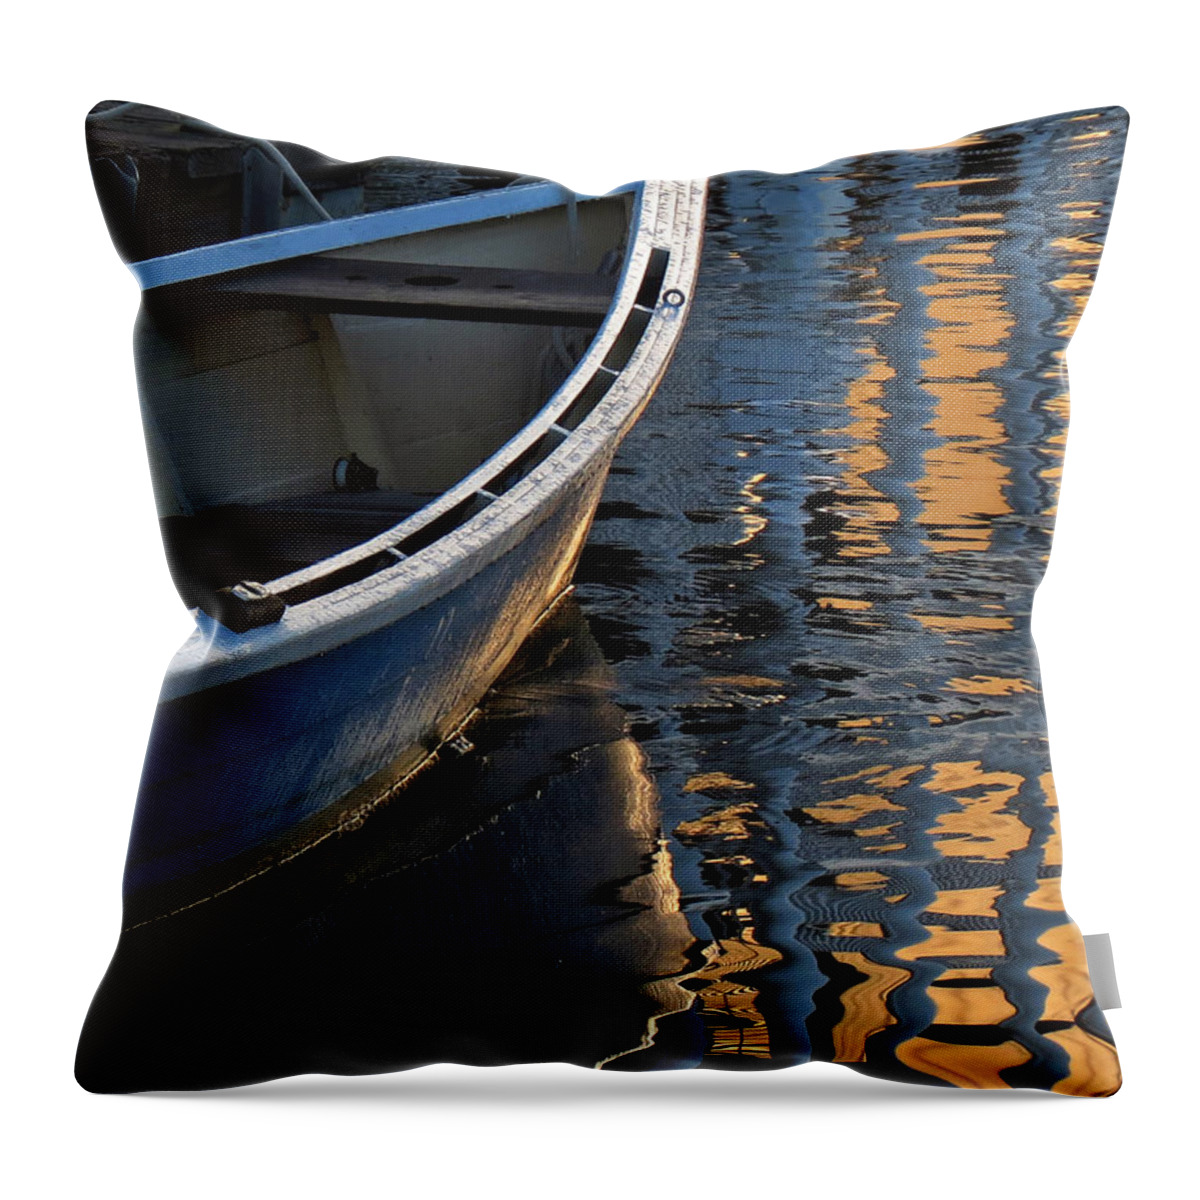 Boat Throw Pillow featuring the photograph Blue Boat Morning by Deborah Smith